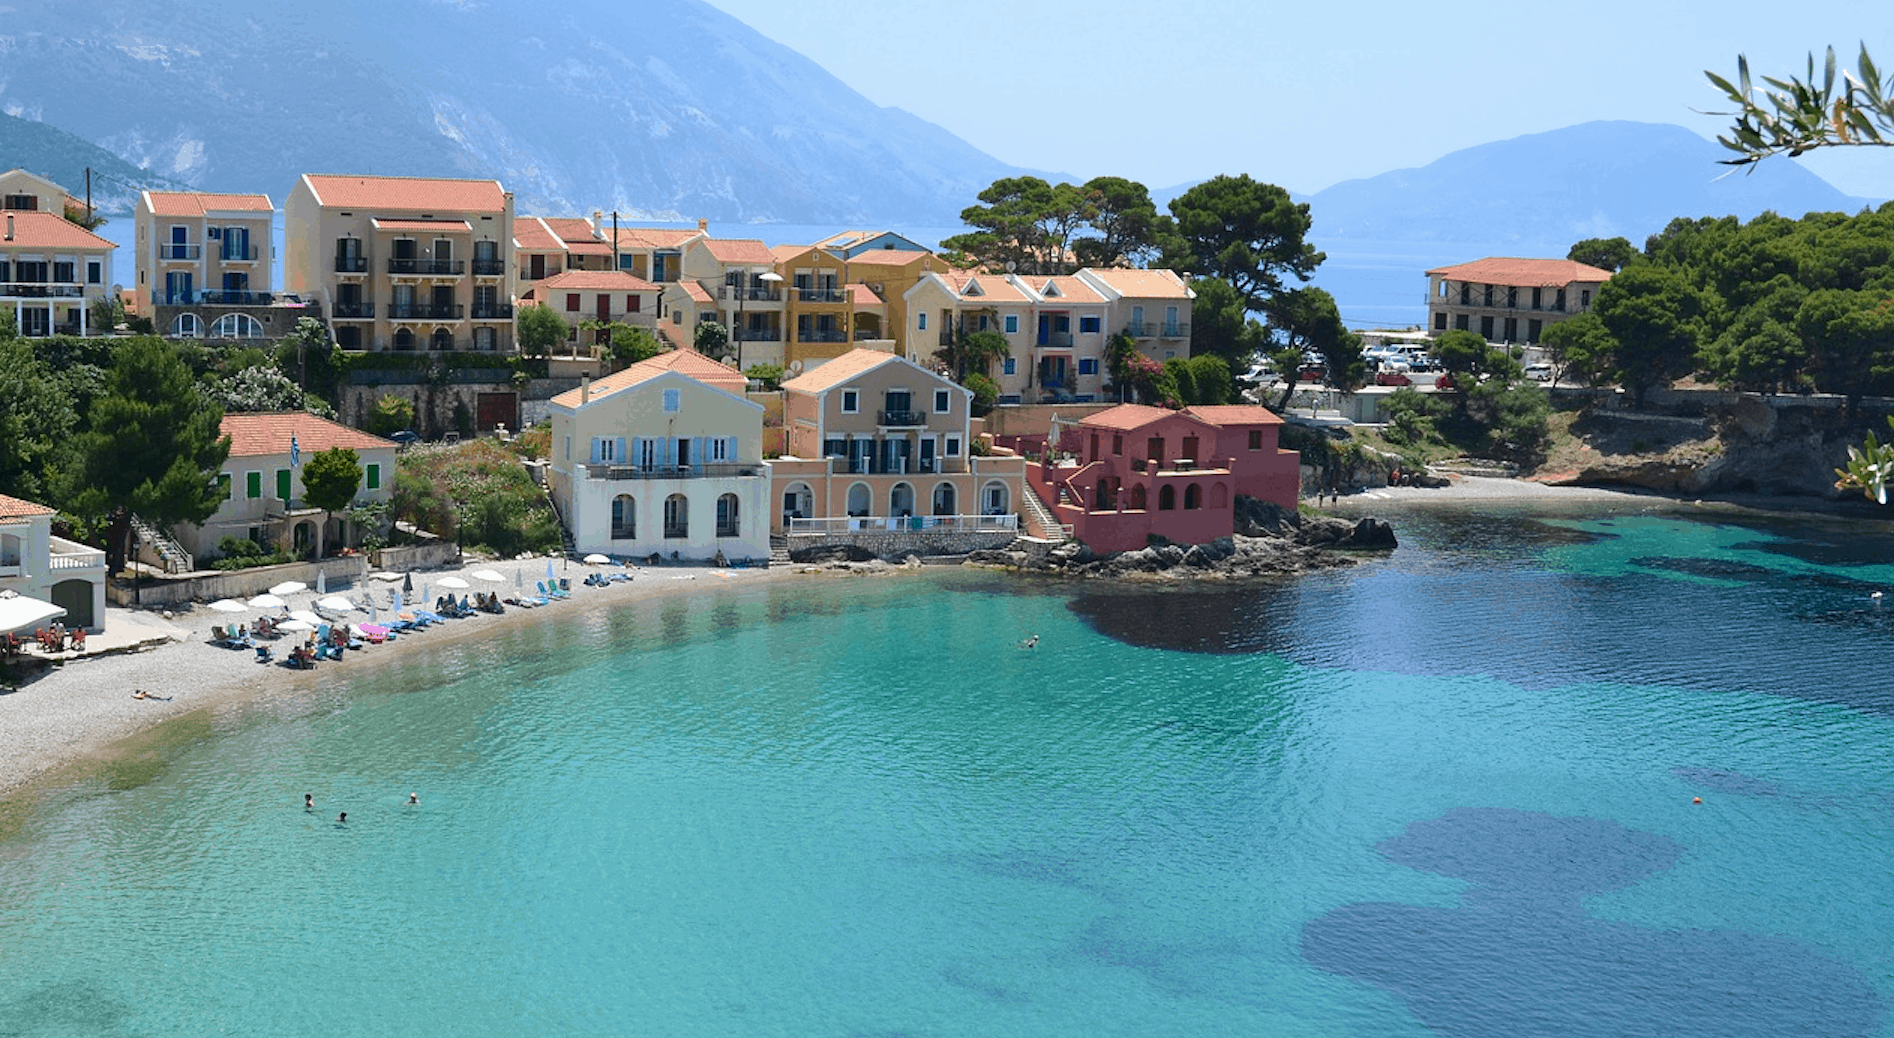 Kefalonia Greece named one of the European Best Destinations for 2021